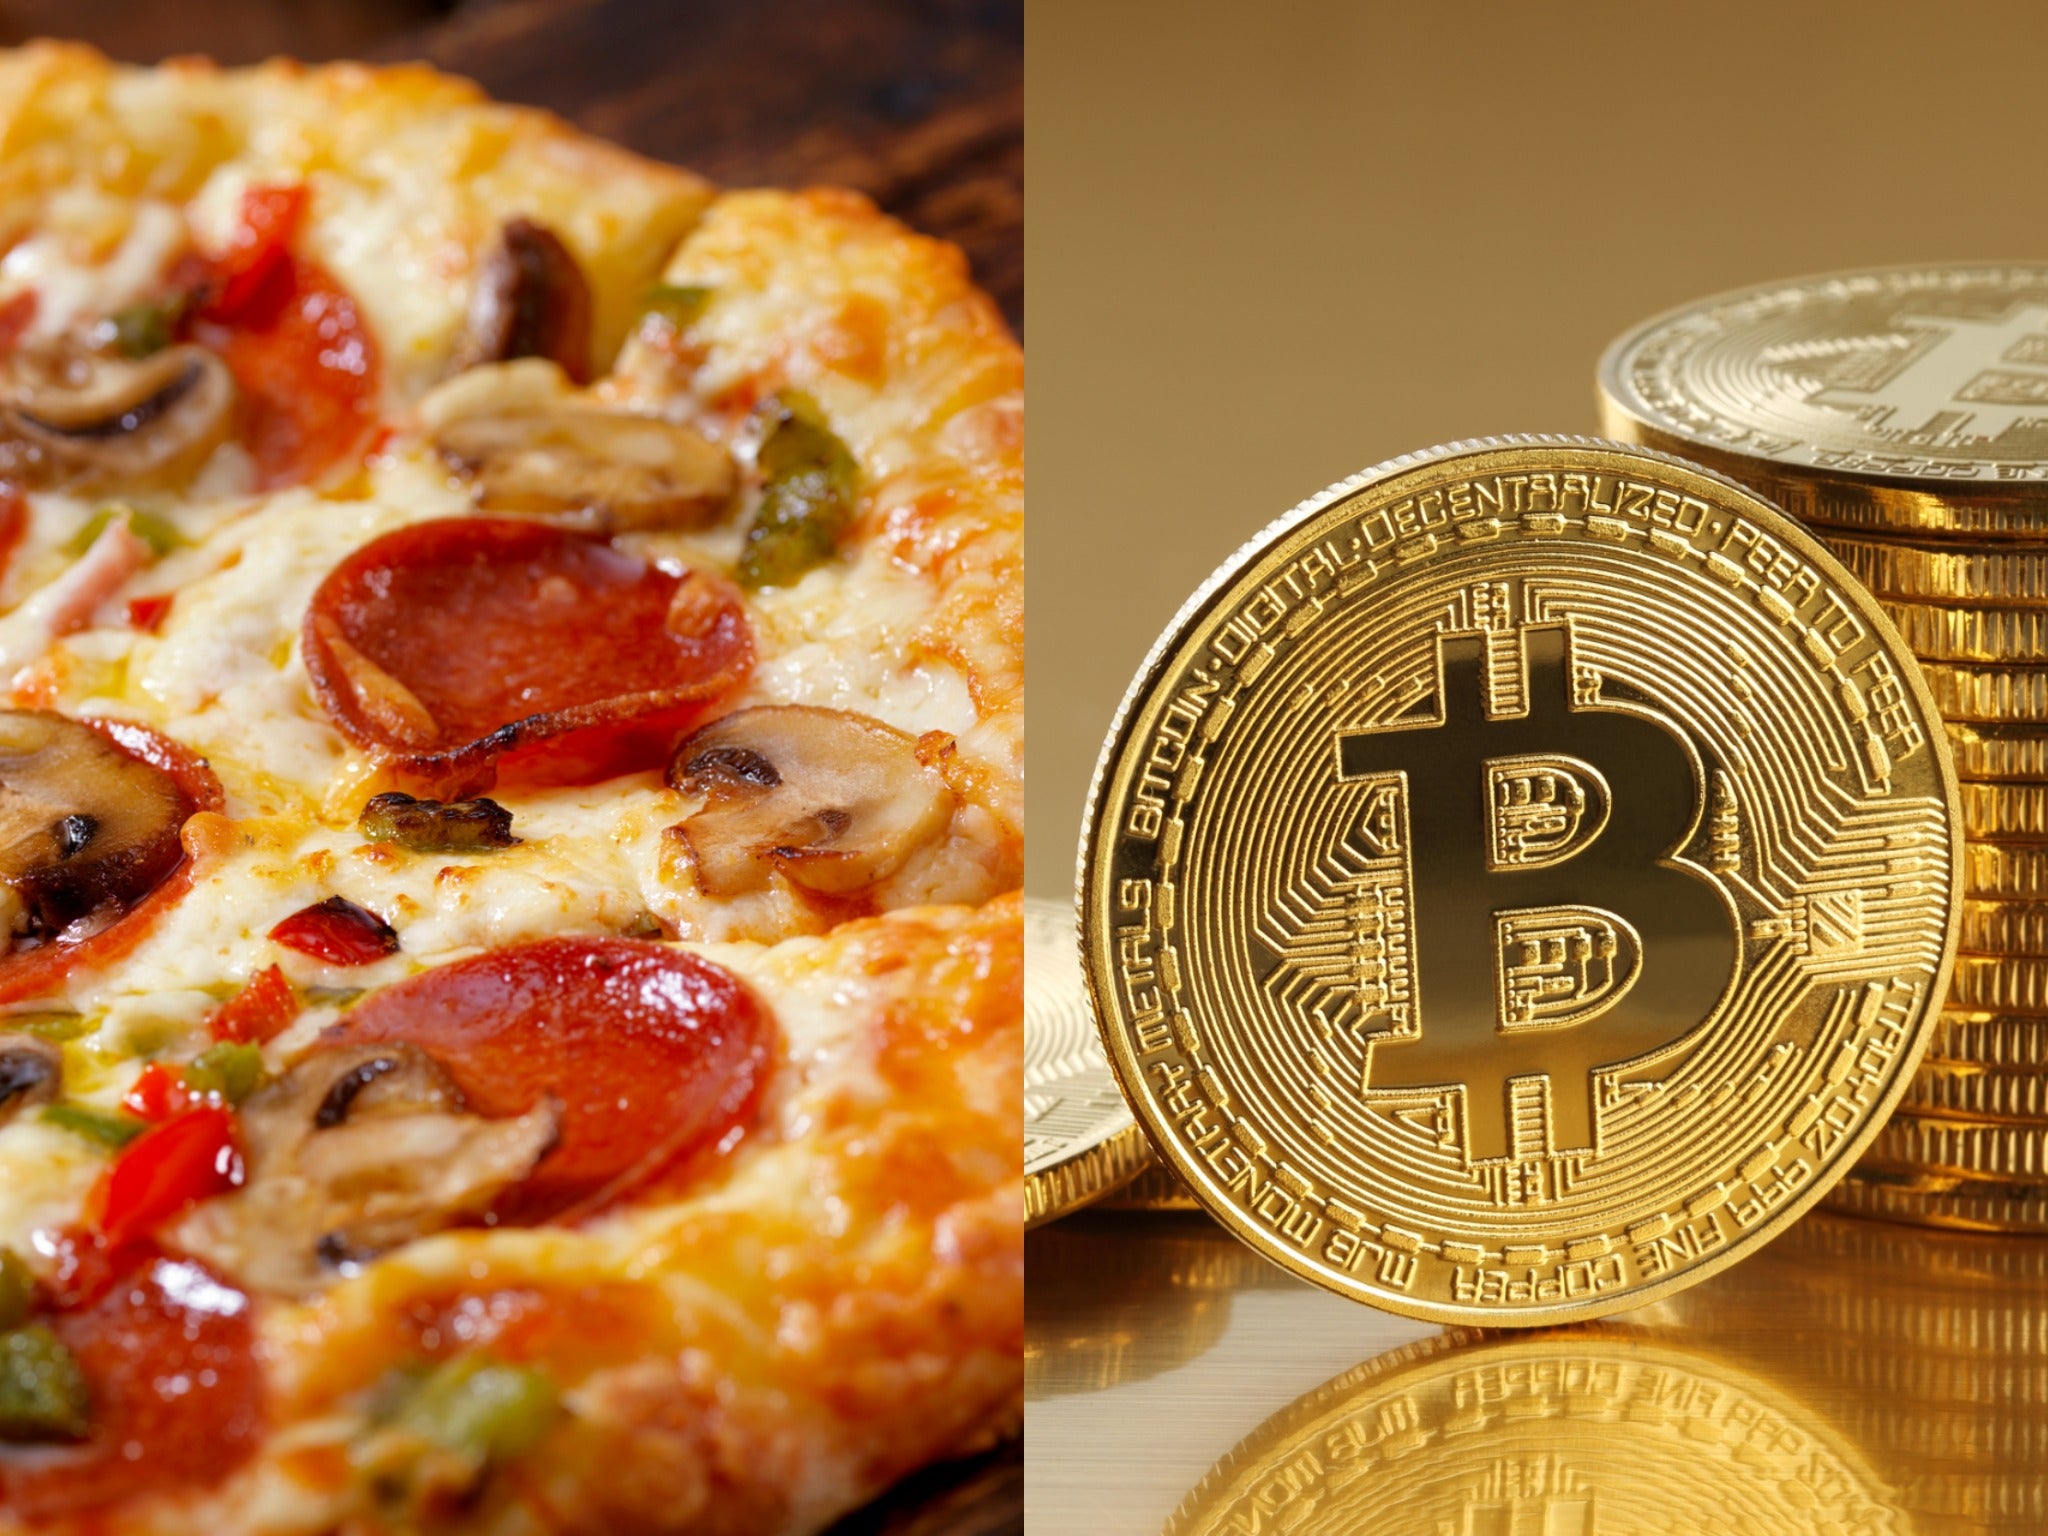 <p>Crypto developer spent $378m worth of fledgling Bitcoin on pizza lunch</p>